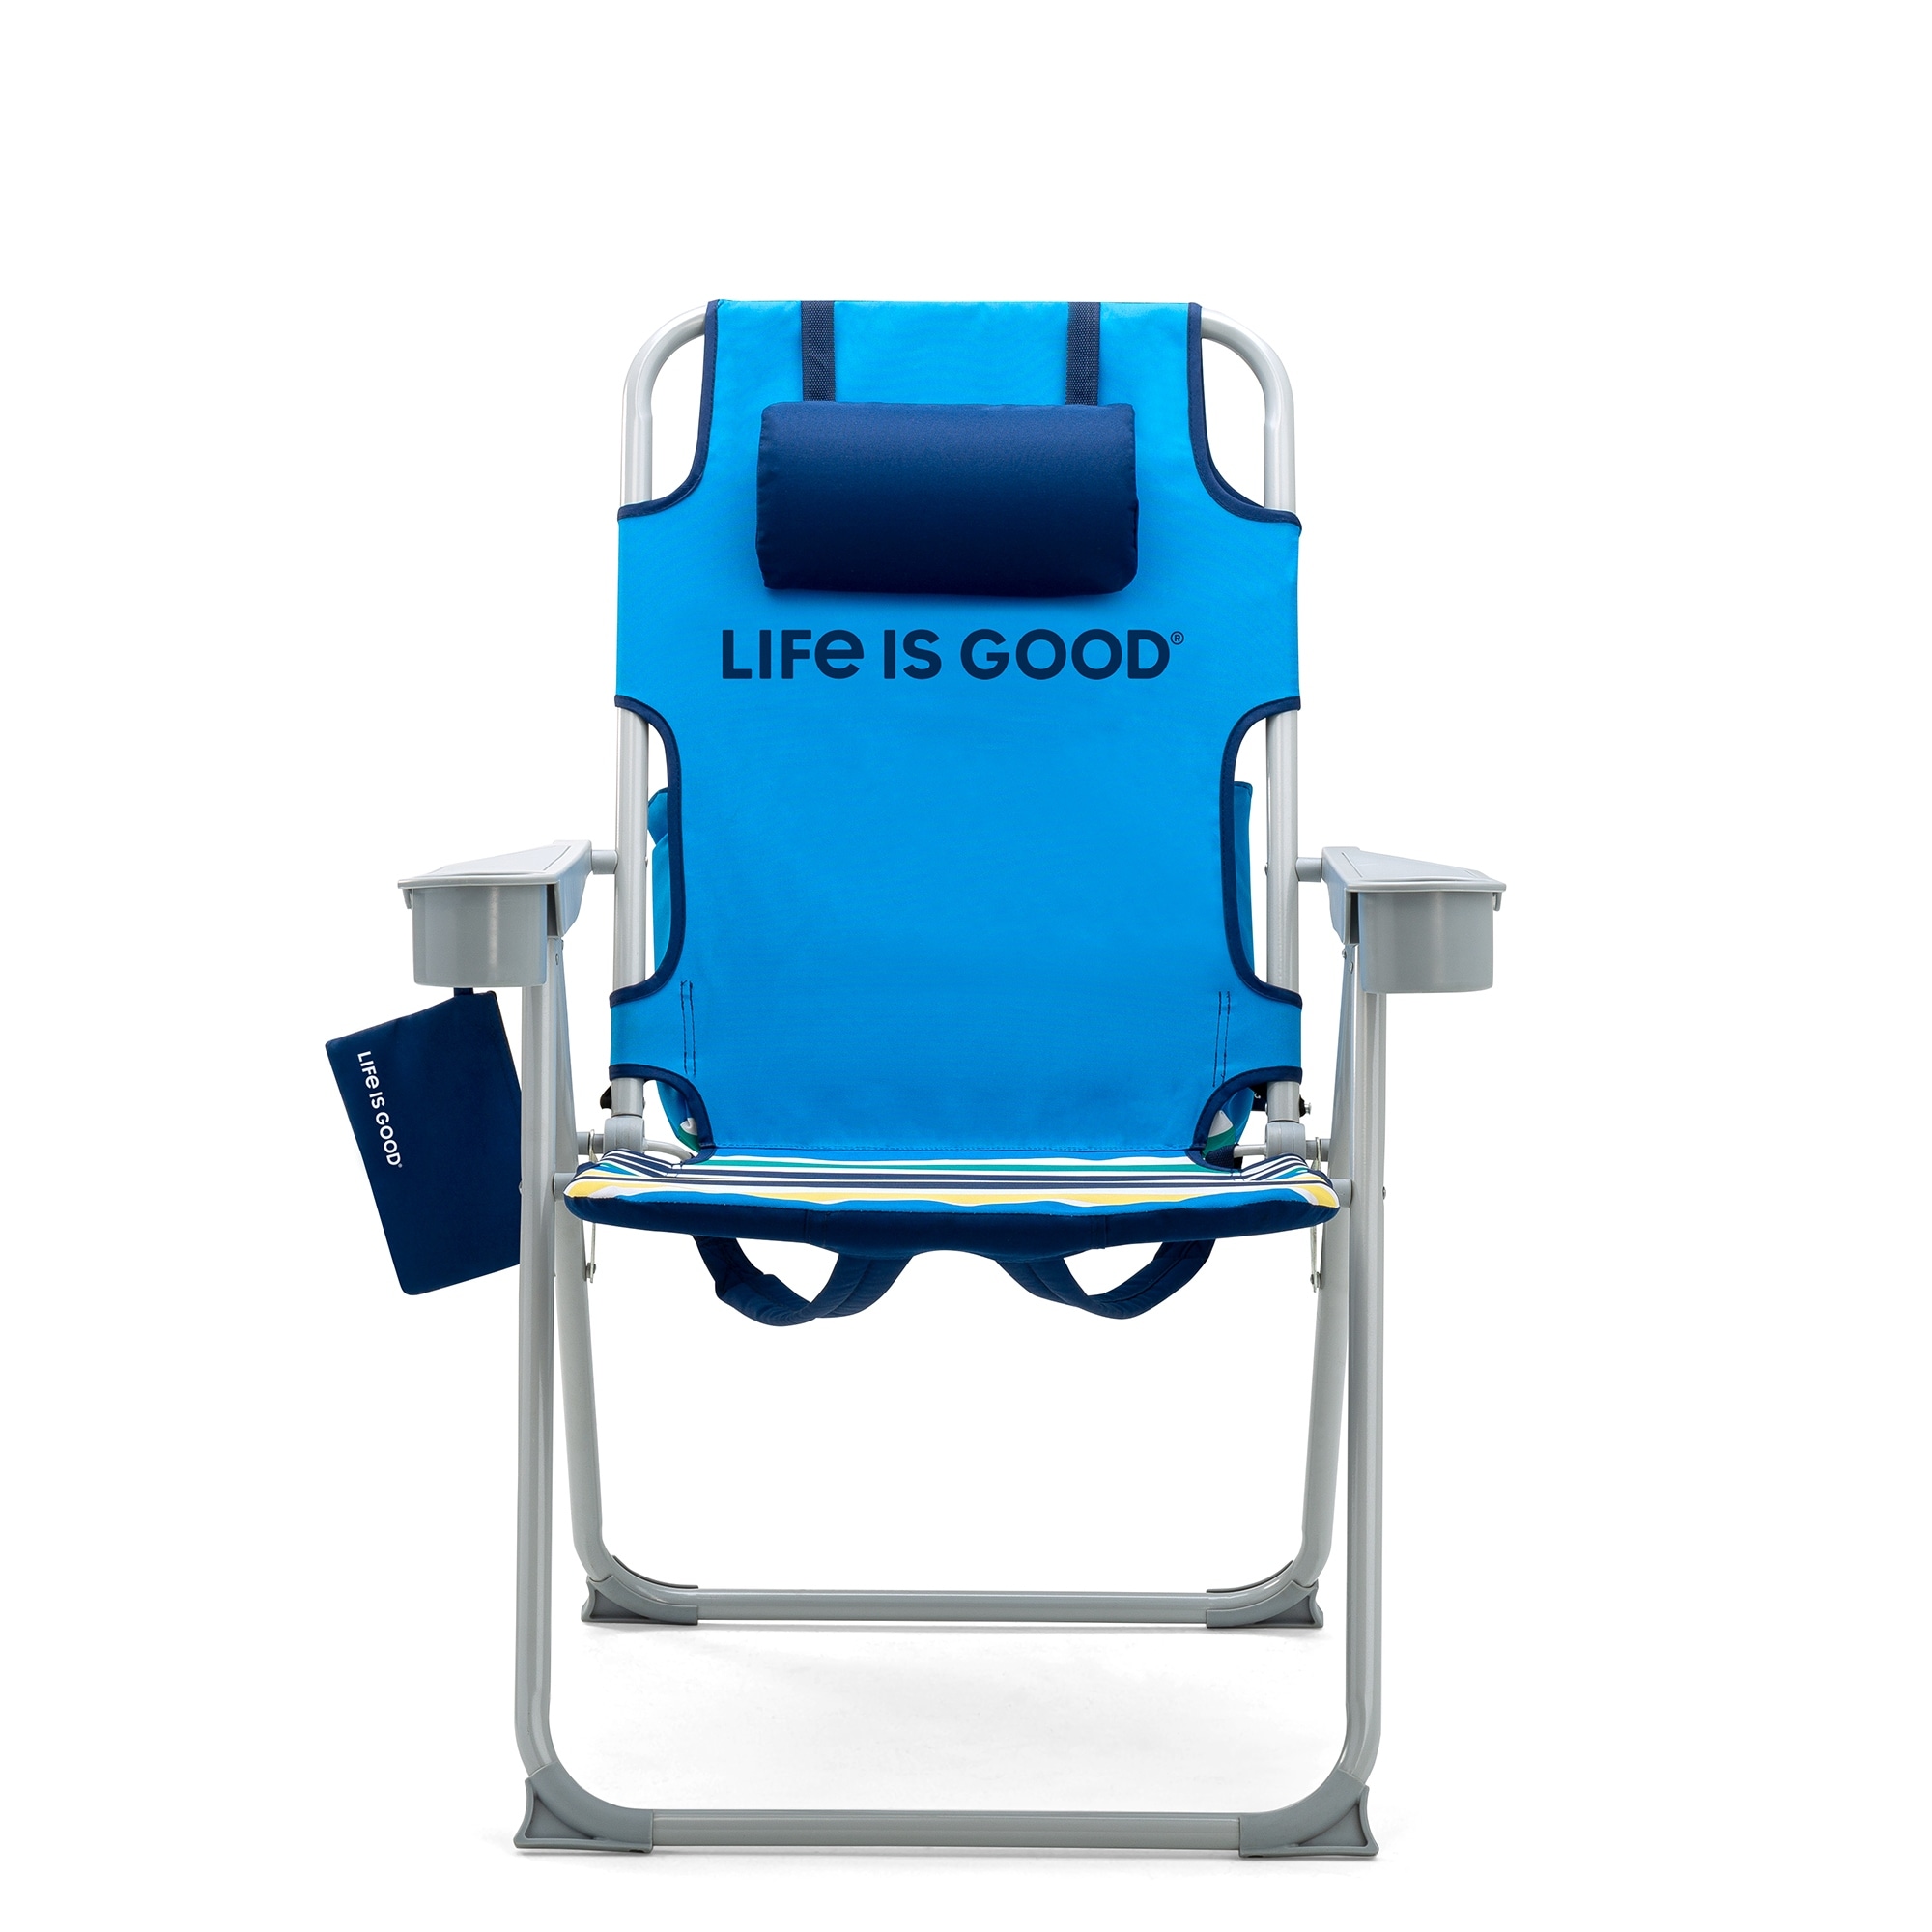 Featured image of post Oversize Lawn Chairs - Kamileo camping chair, folding portable lawn chair with padded armrest cup and.